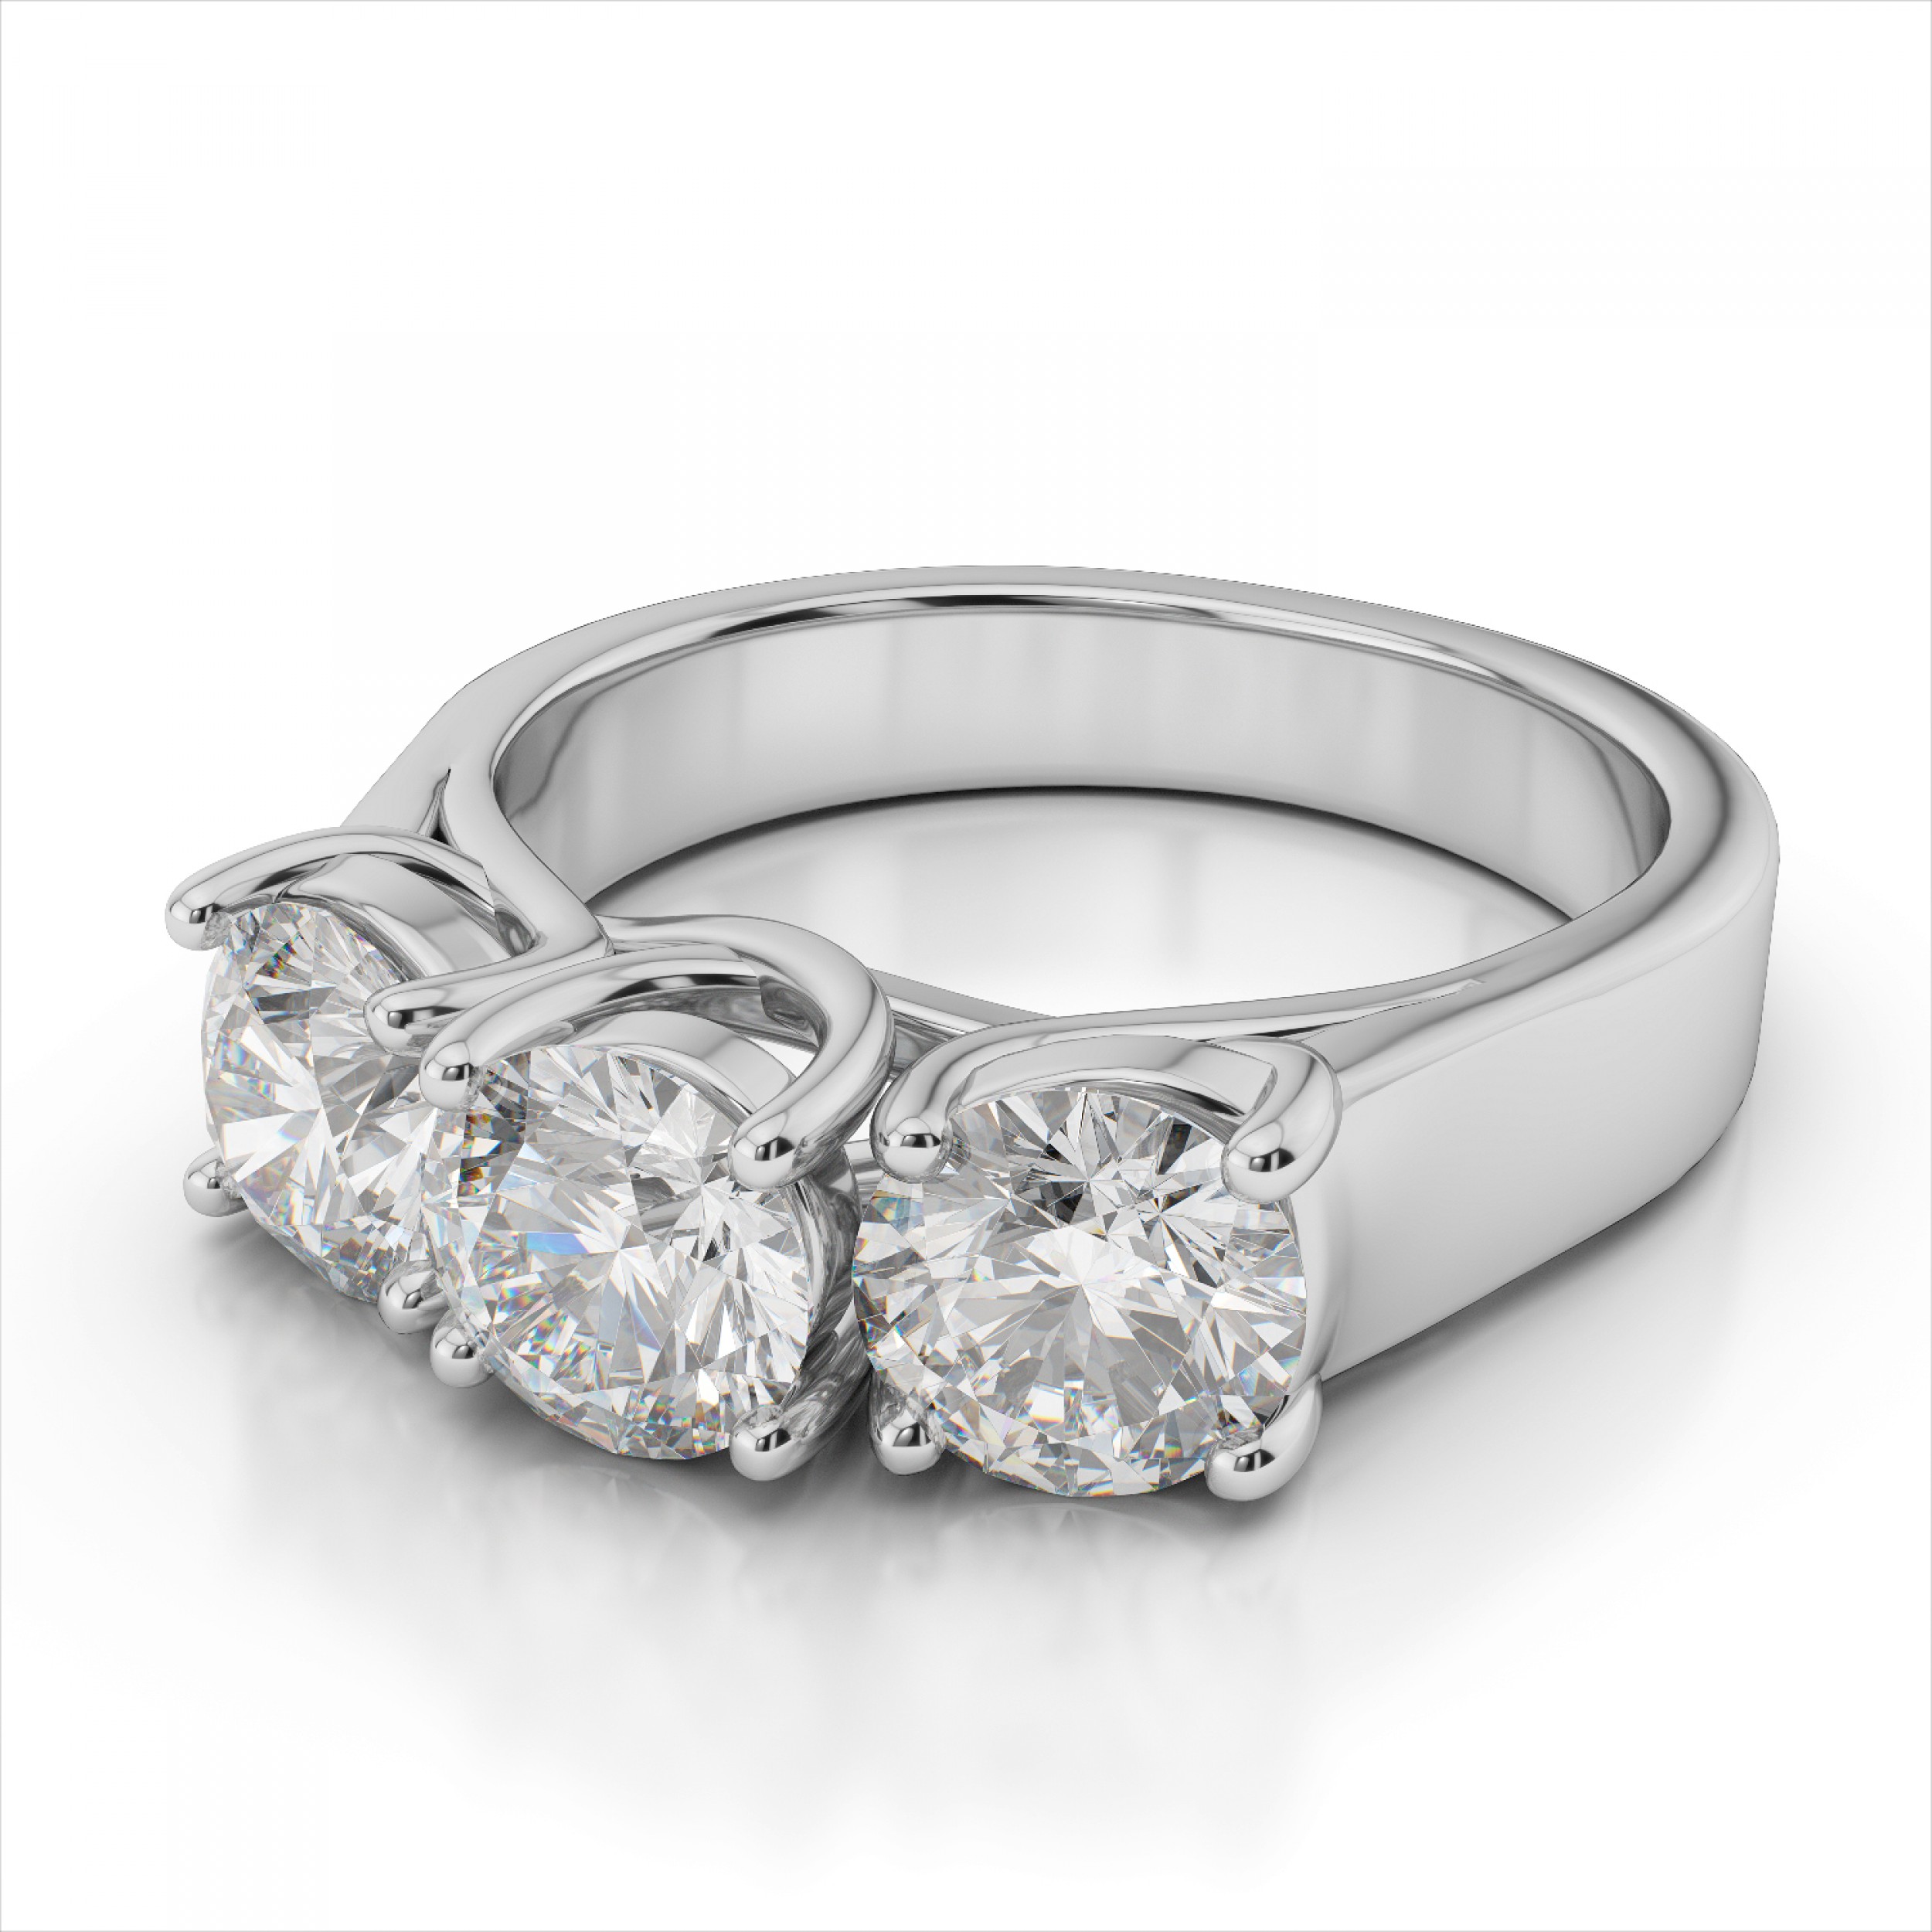 Special Three- Stone Diamond Ring She’ll Love to Flaunt